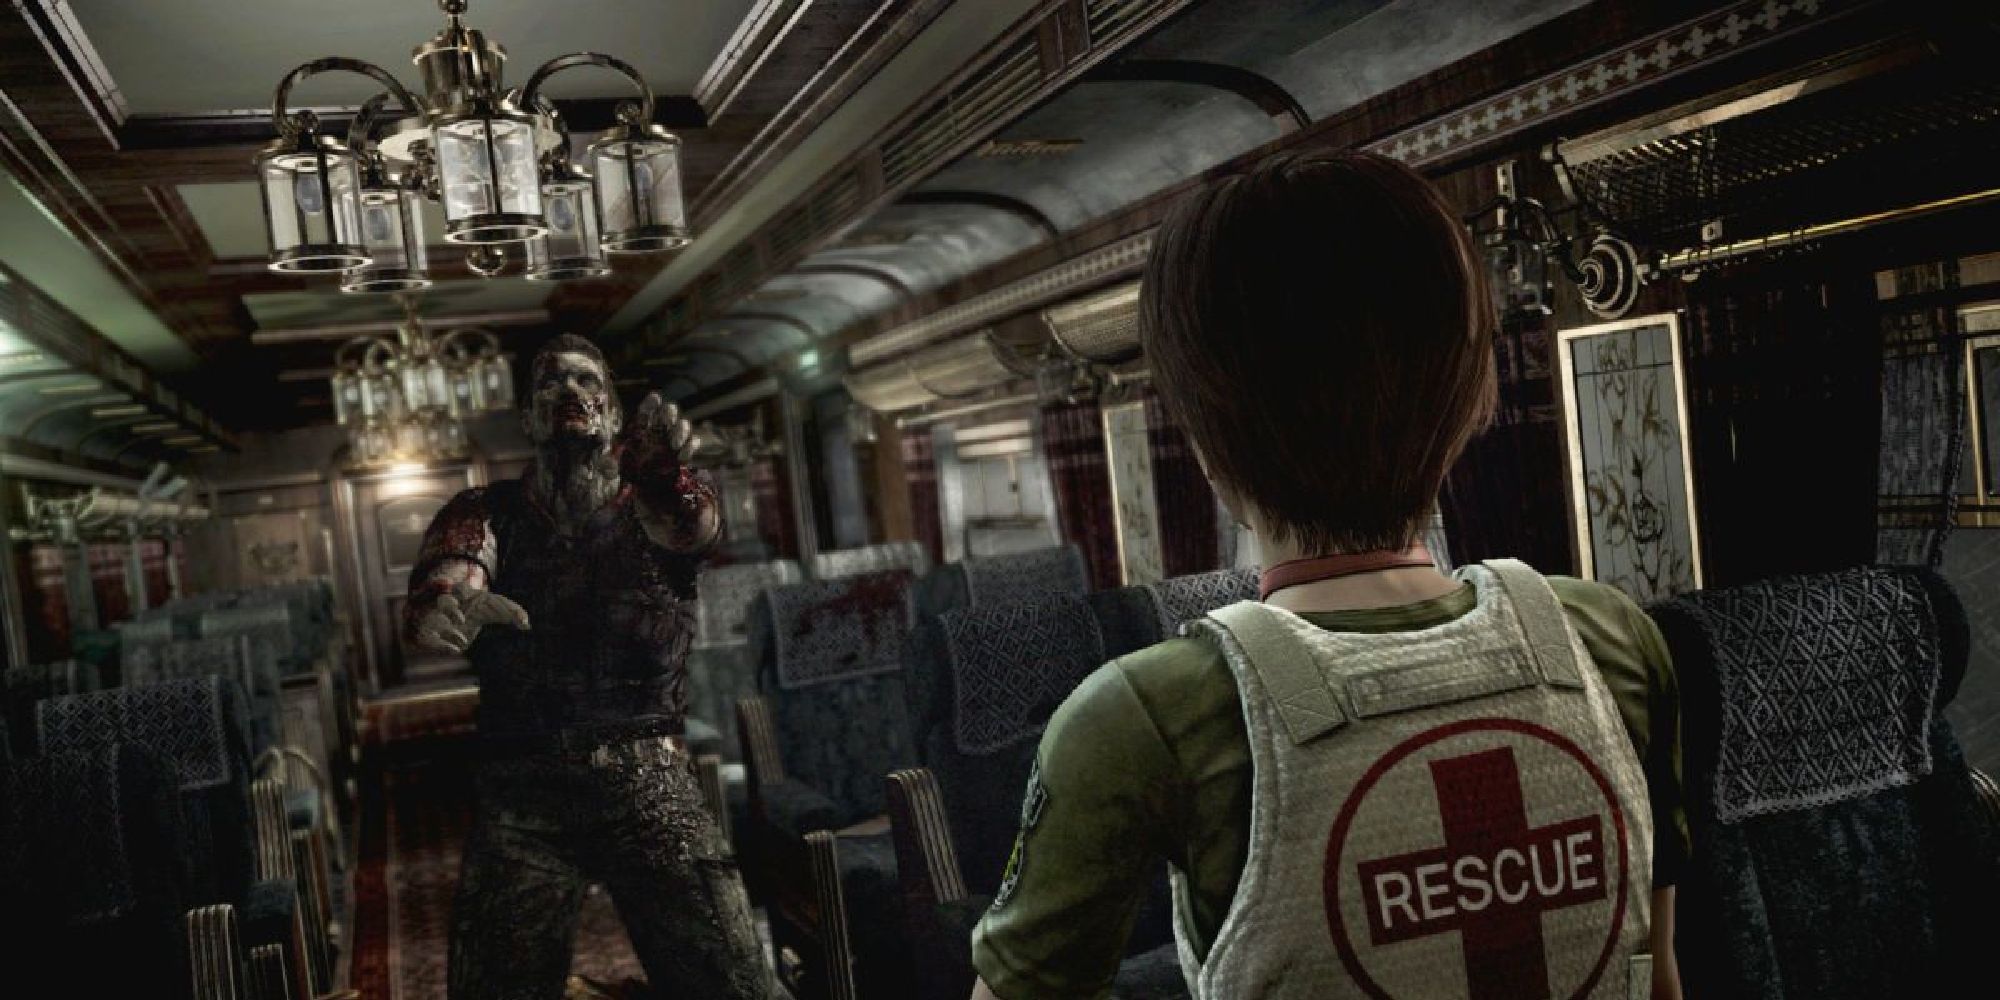 Rebecca facing off against a zombie shambling towards her on a luxurious train car.